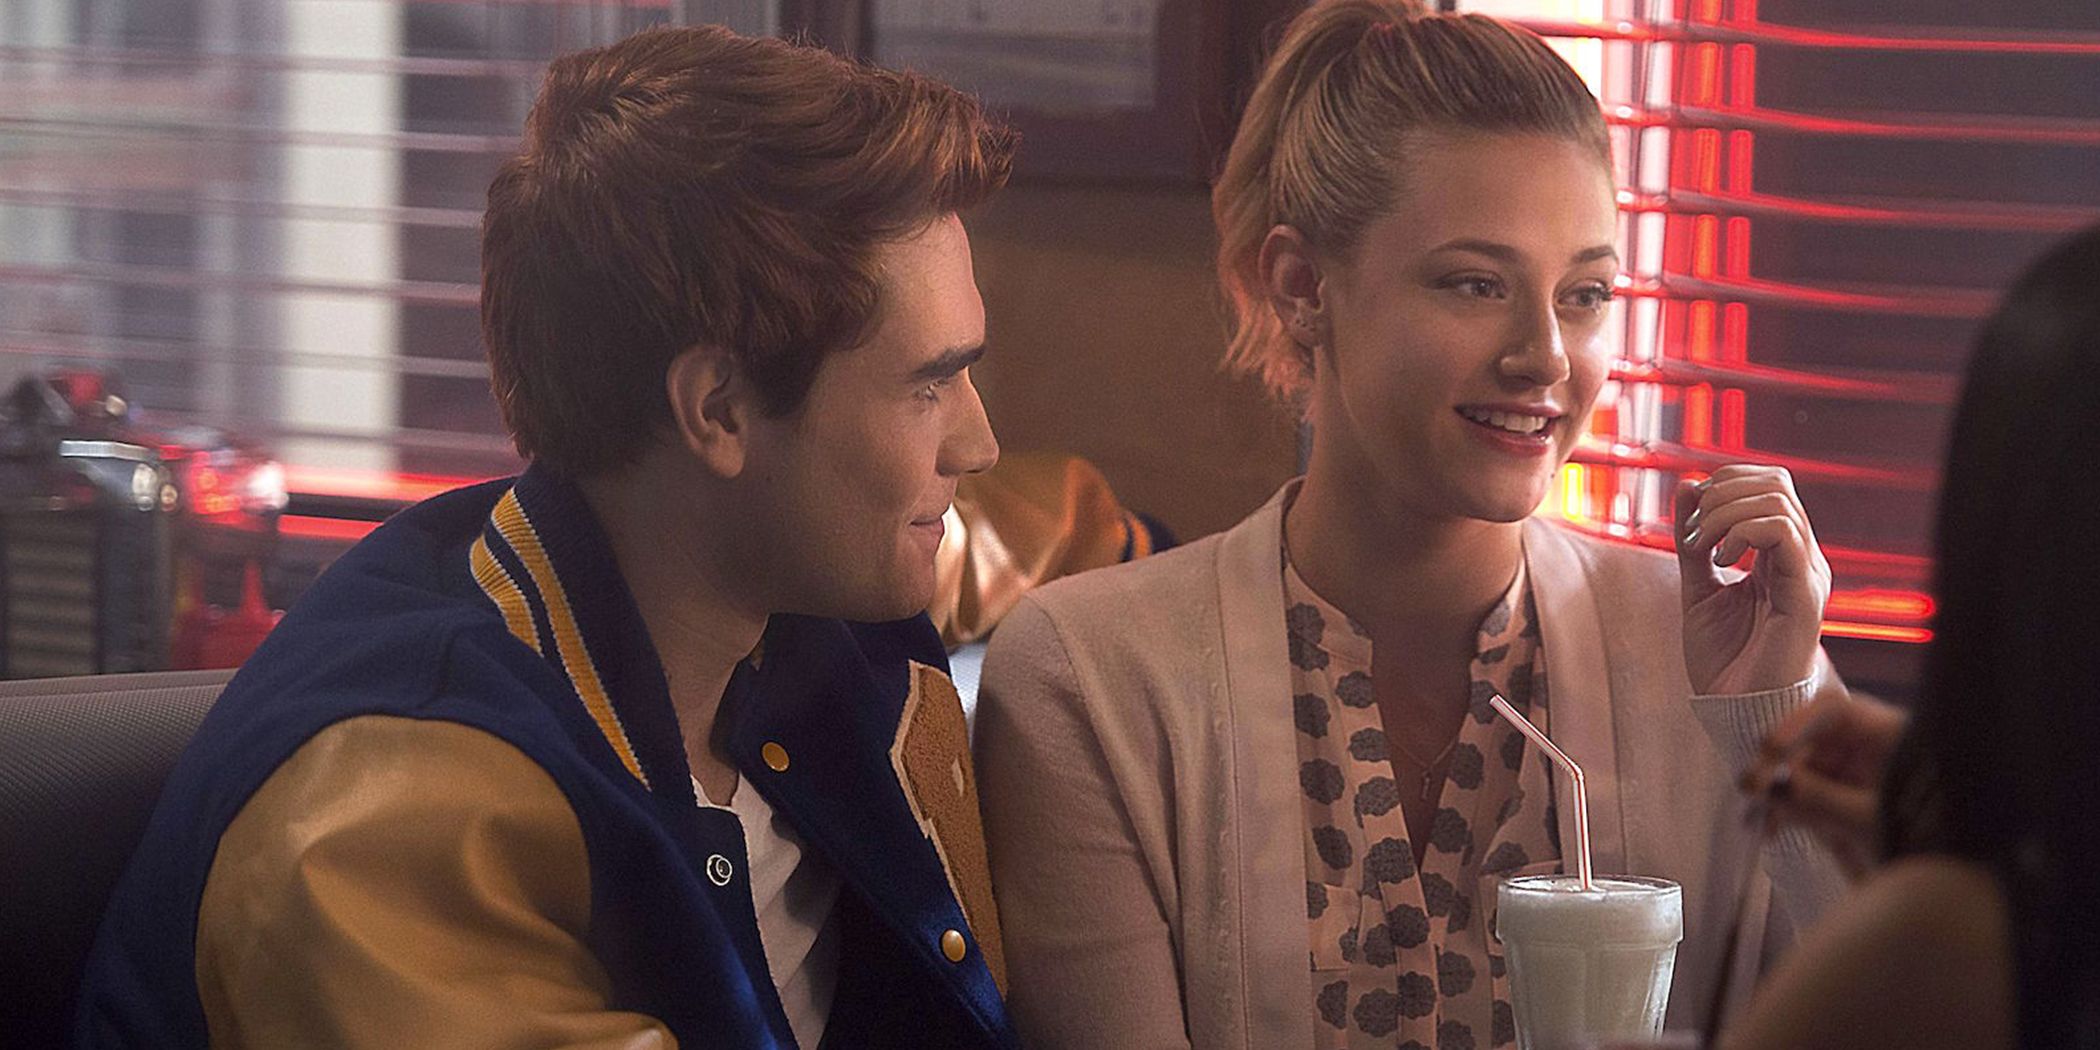 Betty and Archie sit together at Pop's diner